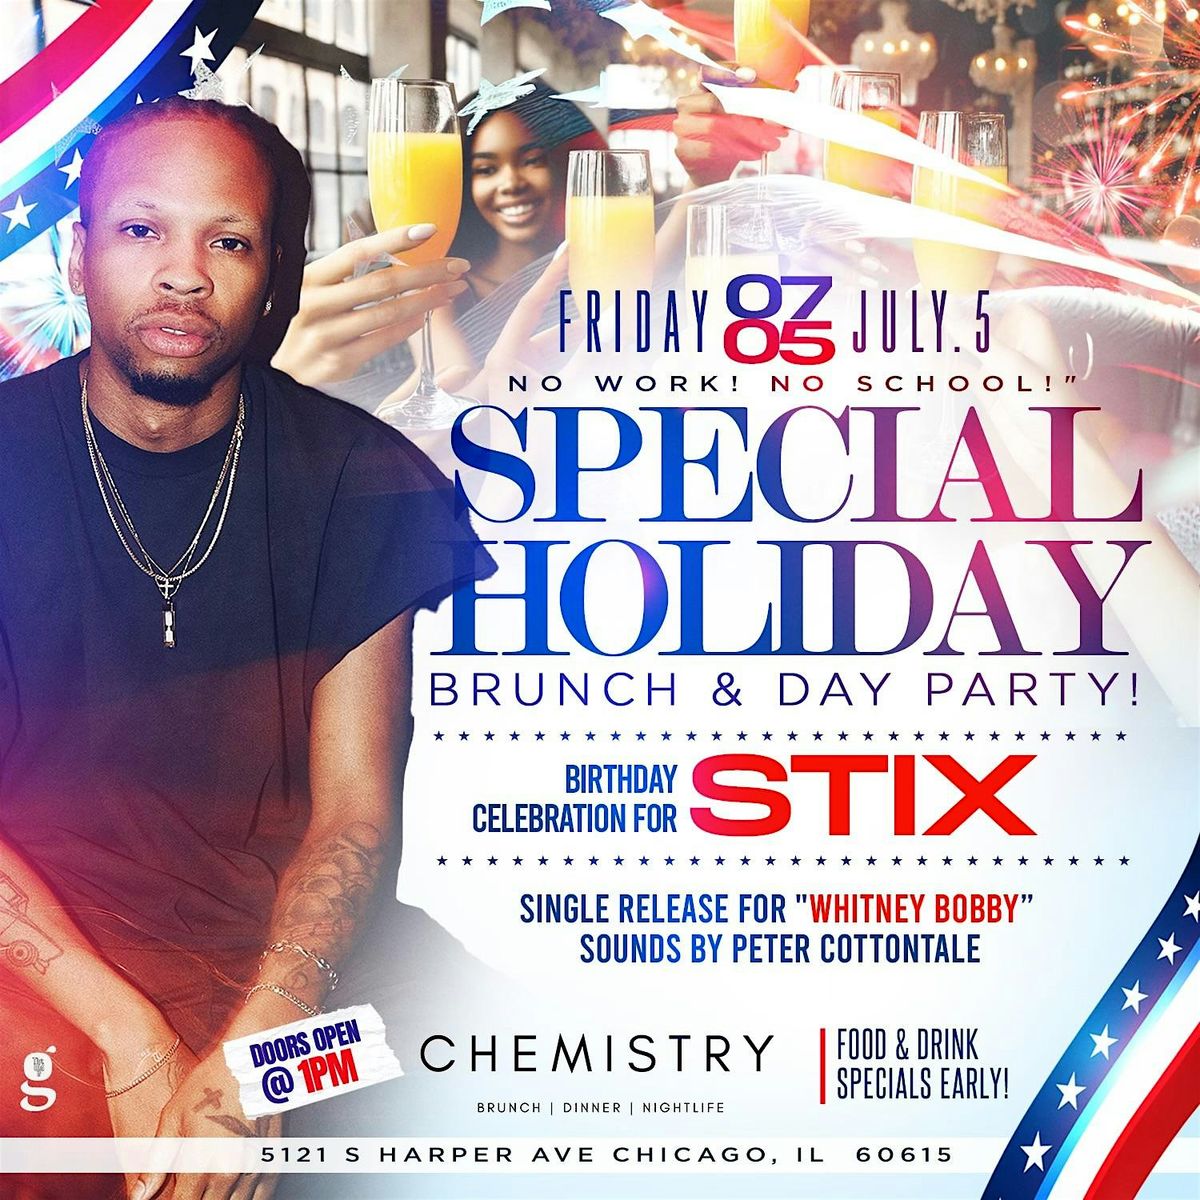 July 5th! Holiday Edition! The BEST Friday Happy Hour @ Chemistry!